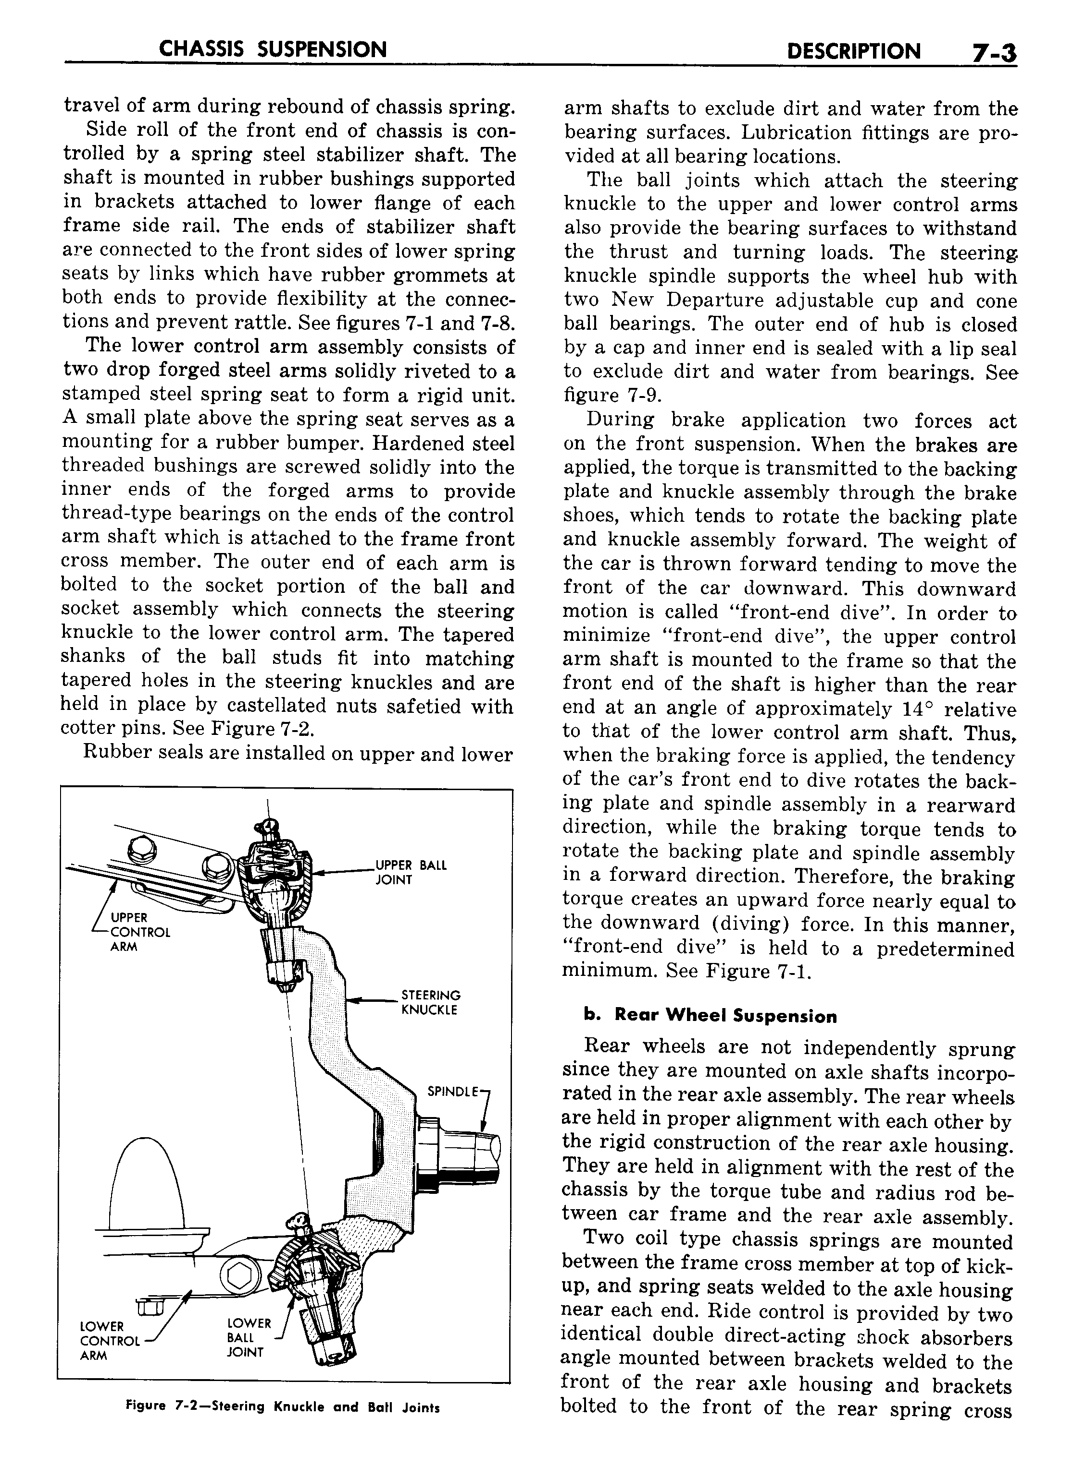 n_08 1957 Buick Shop Manual - Chassis Suspension-003-003.jpg